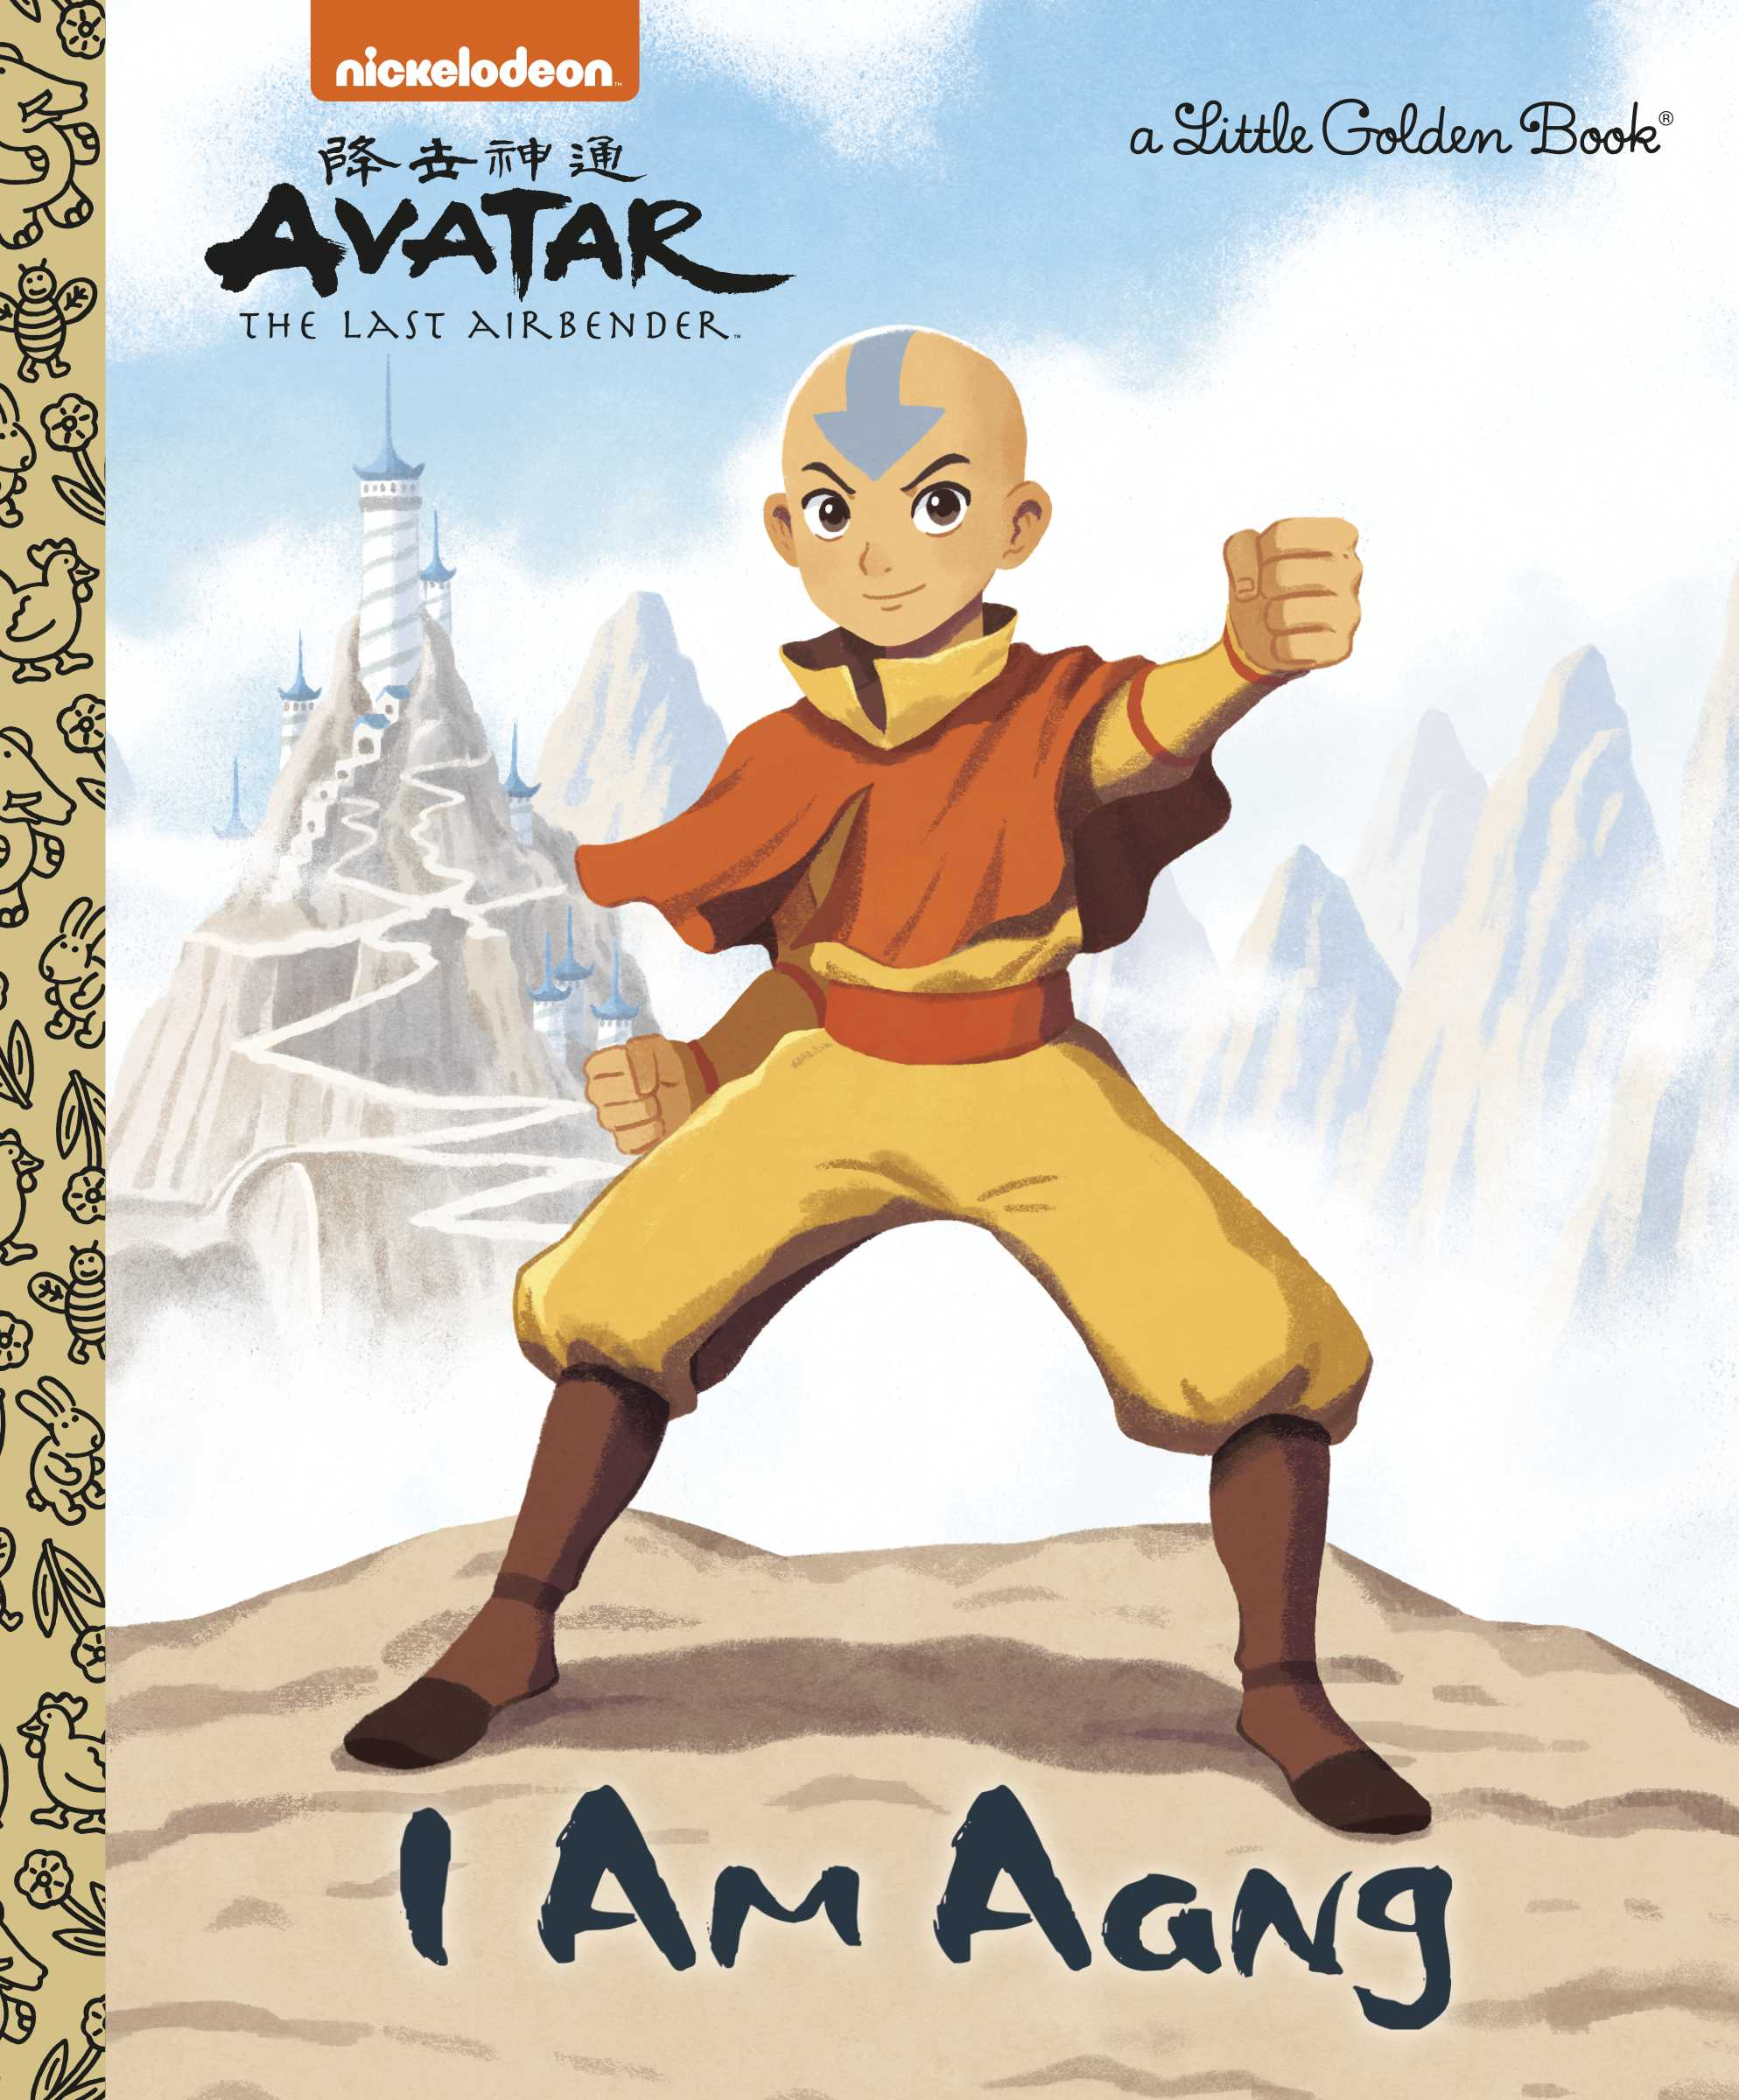 NickALive New Avatar The Last Airbender Figures From McFarlane Toys  Are On Sale Now